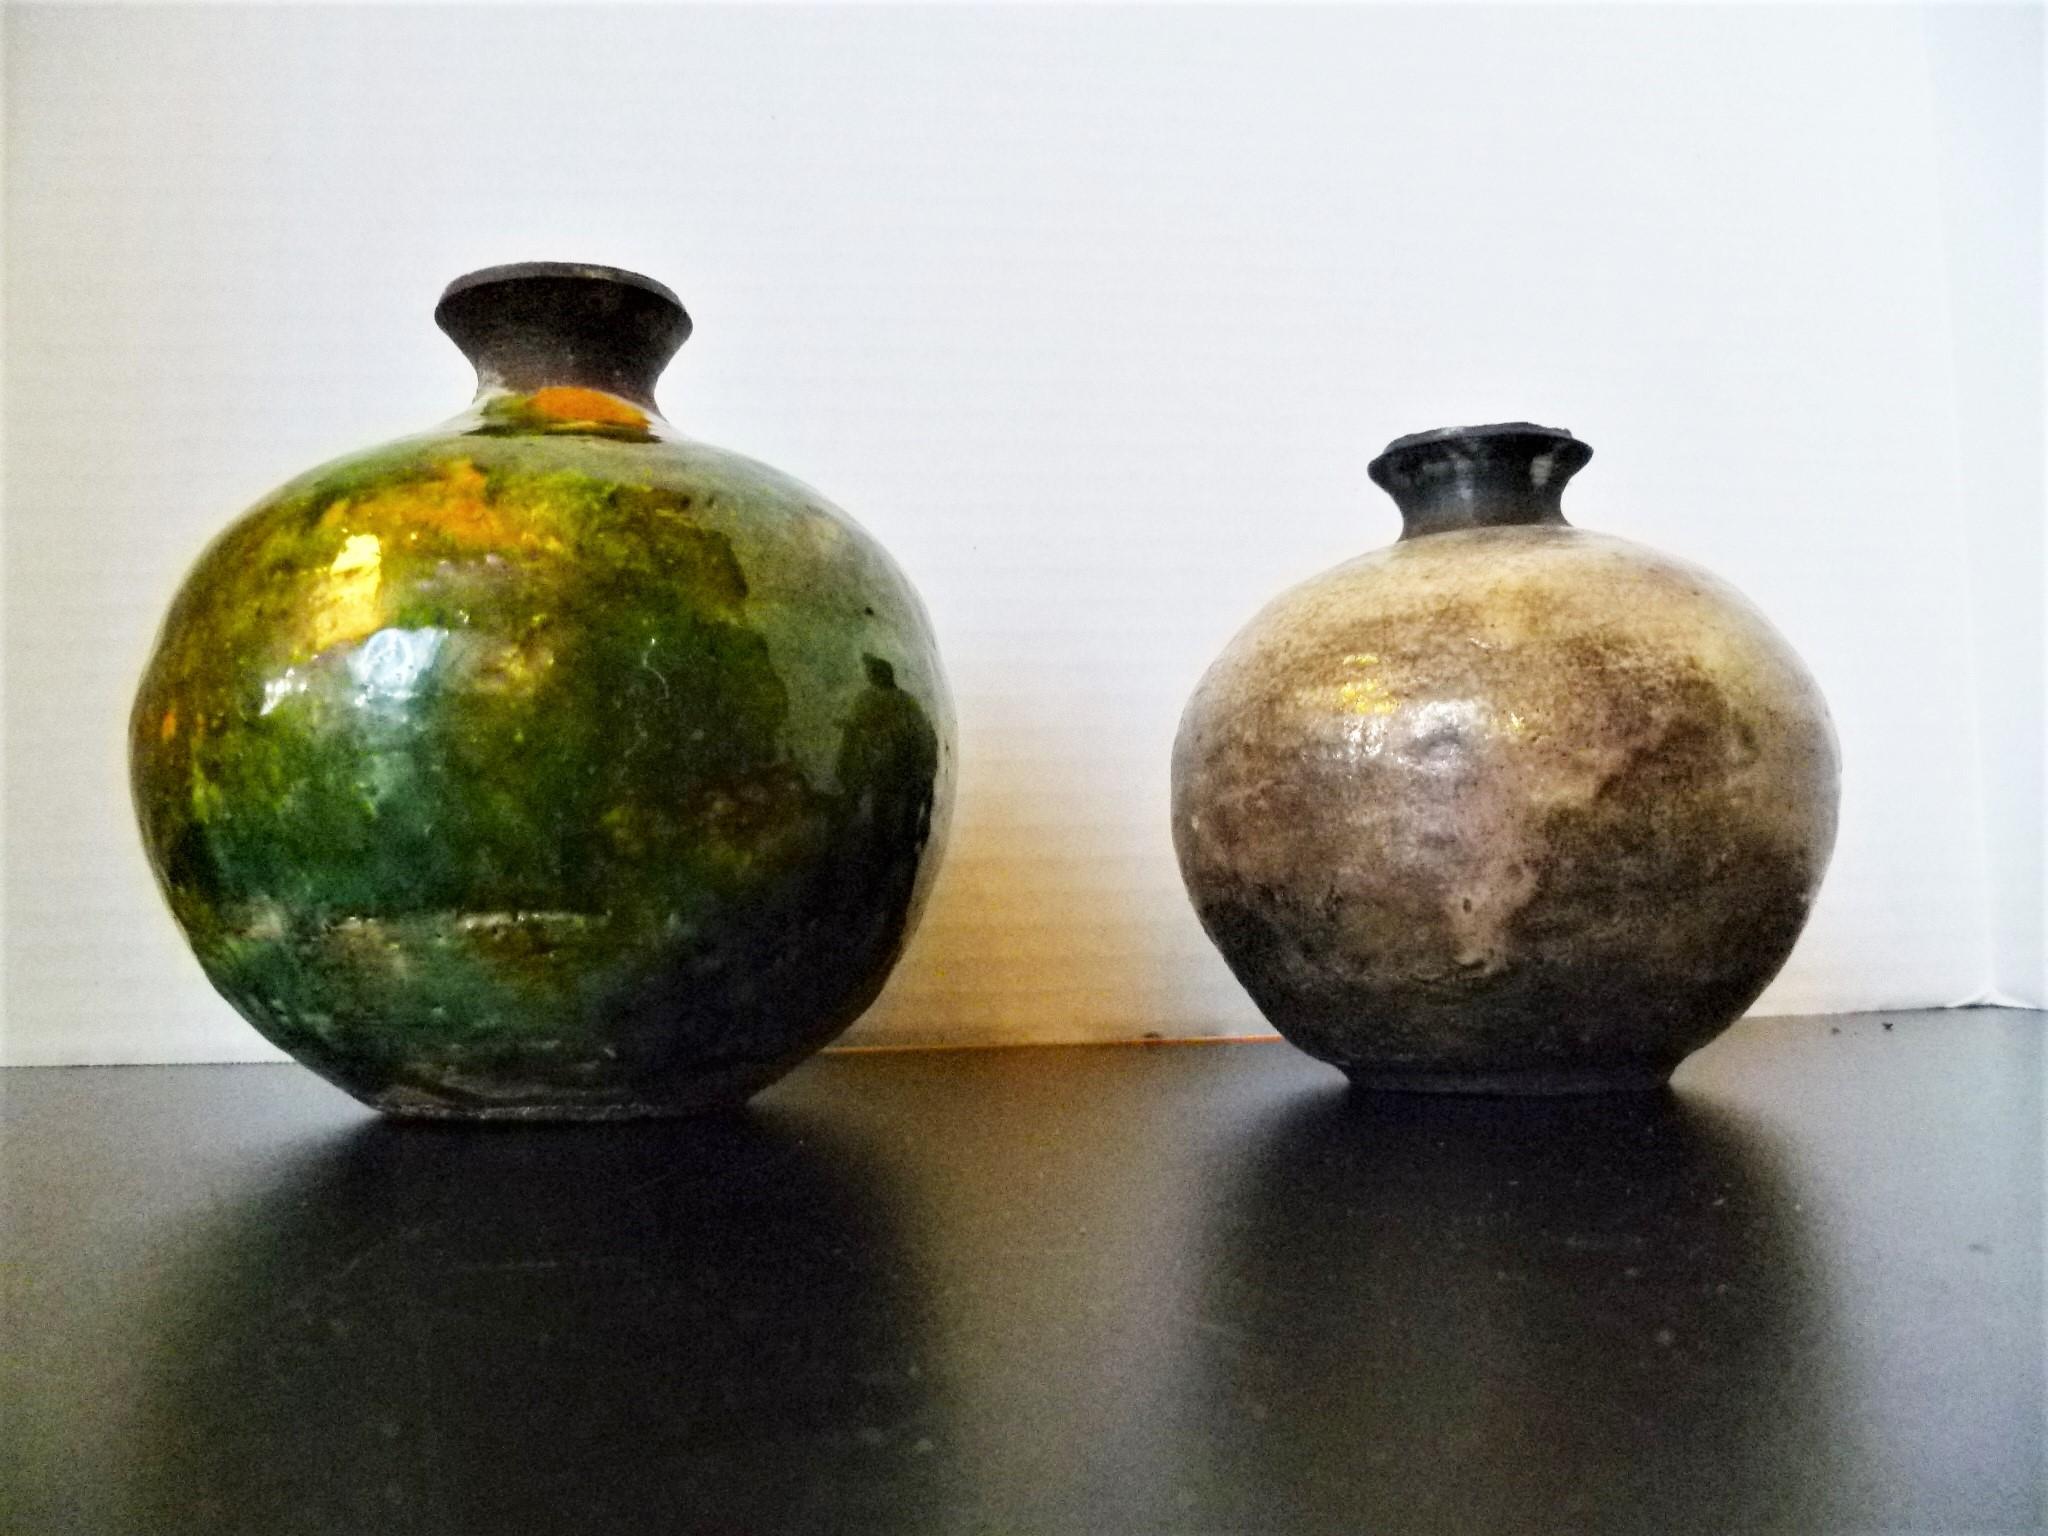 Early 1960s Weed Pots, two pieces of organic modern Studio Pottery signed E. Jensen. Done in the Western Raku method. The smaller brownish tone with the tell tale crackle of Raku firing, the larger green vessel seems to have been glazed over a Raku